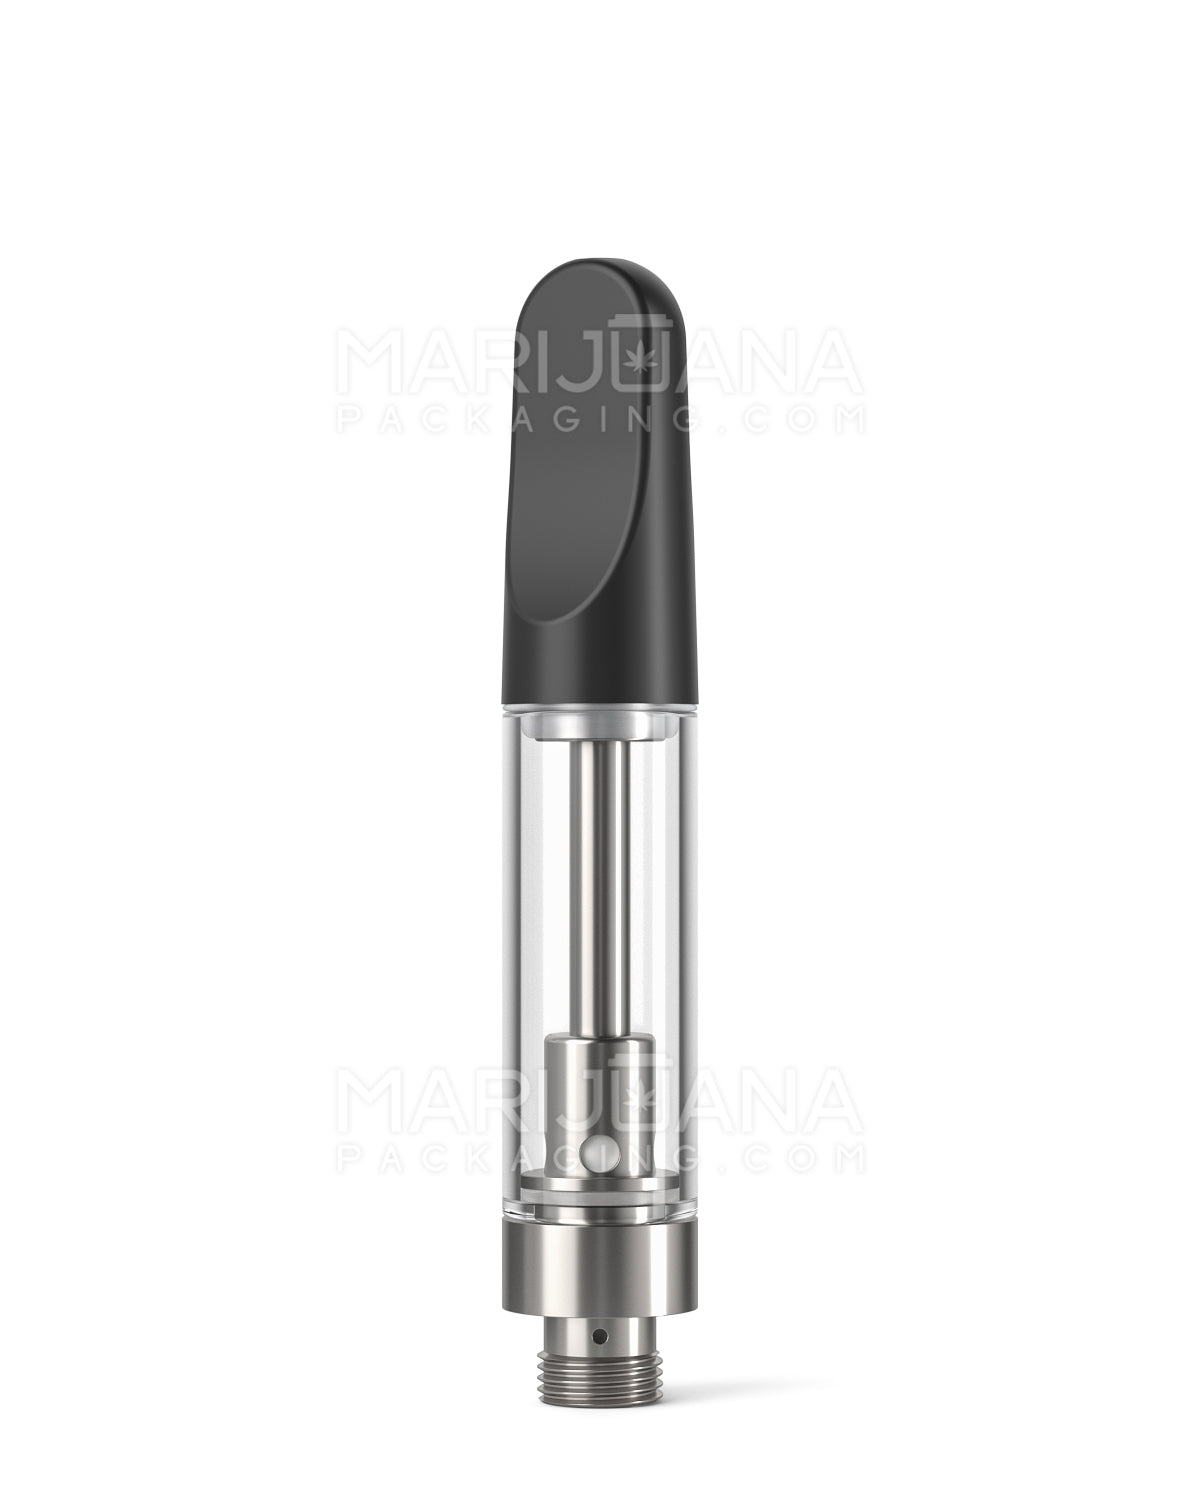 CCELL | Liquid6 Reactor Glass Vape Cartridge with Black Plastic Mouthpiece | 1mL - Screw On - 100 Count - 1